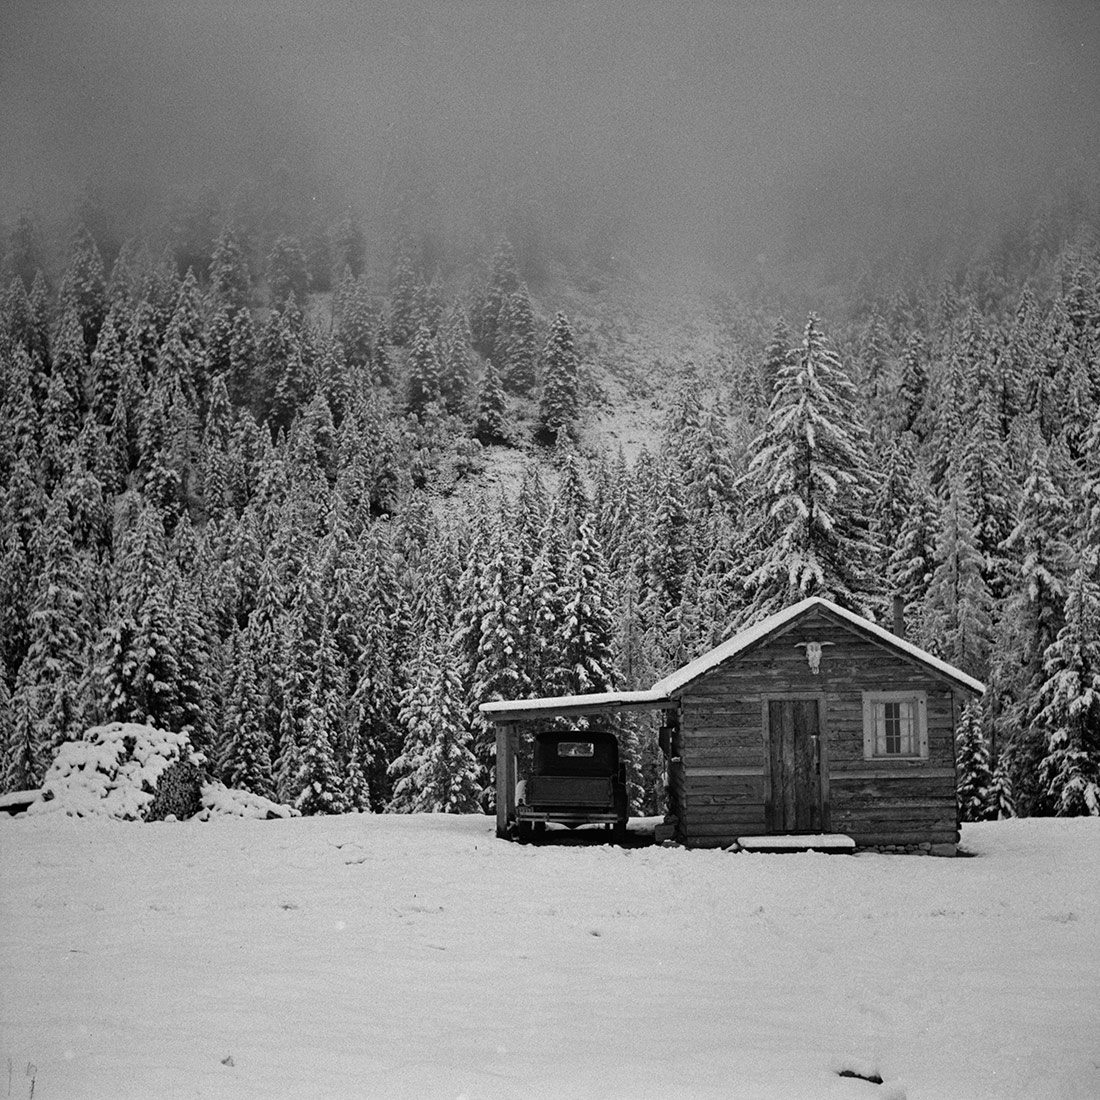 Cowhands' cabin on ranch after early fall blizzard in mountains near Aspen, Colorado, 1941